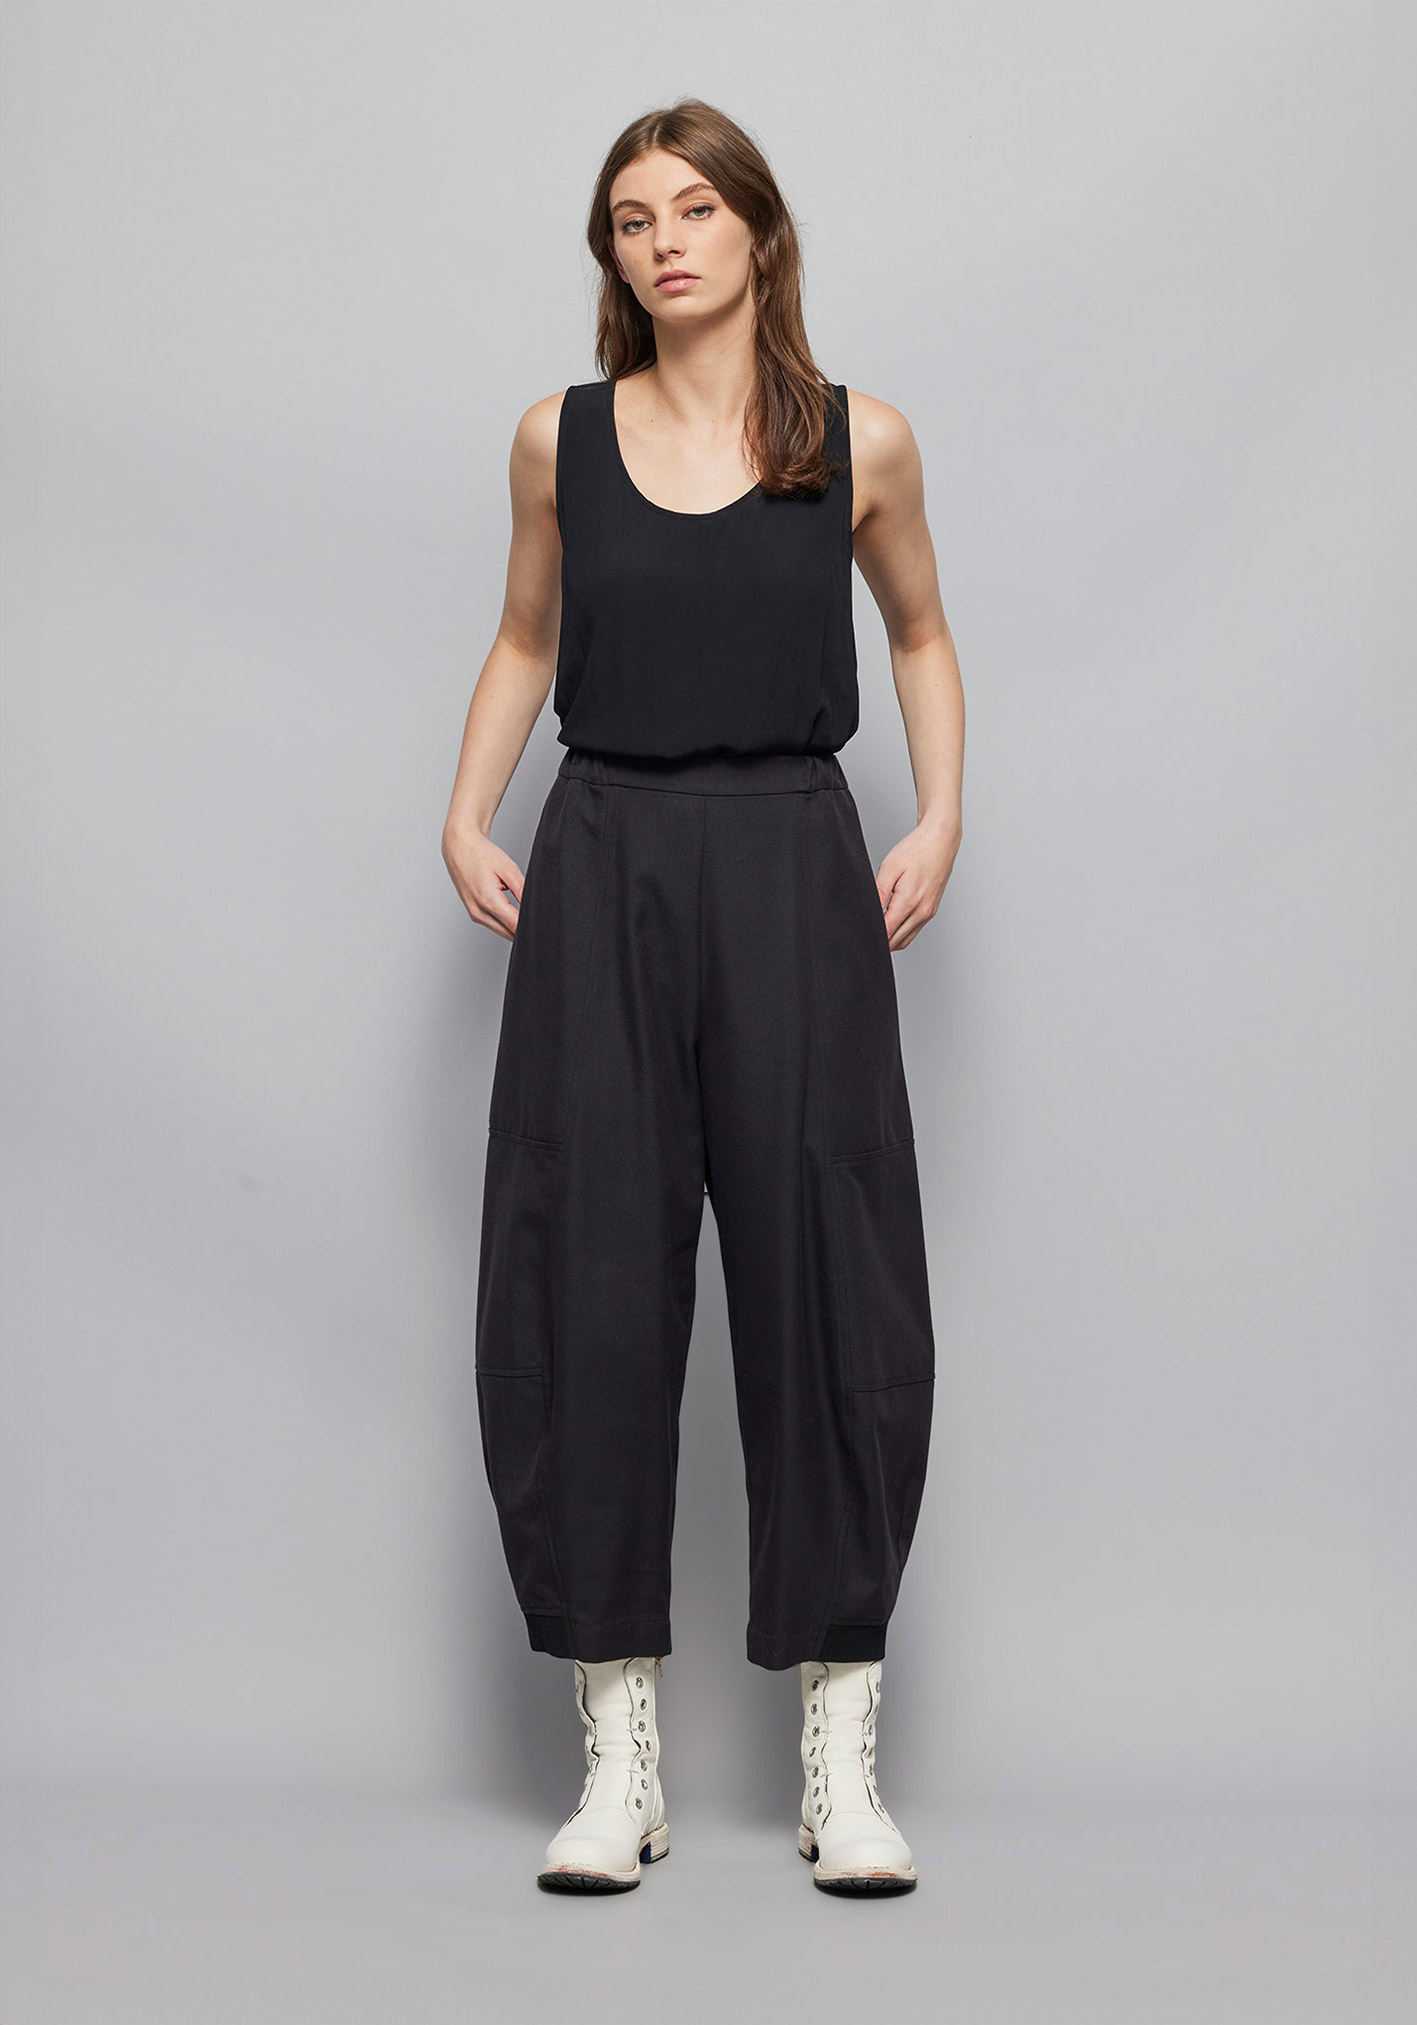 buy the latest Arch Contour Pant - Cotton Twill online